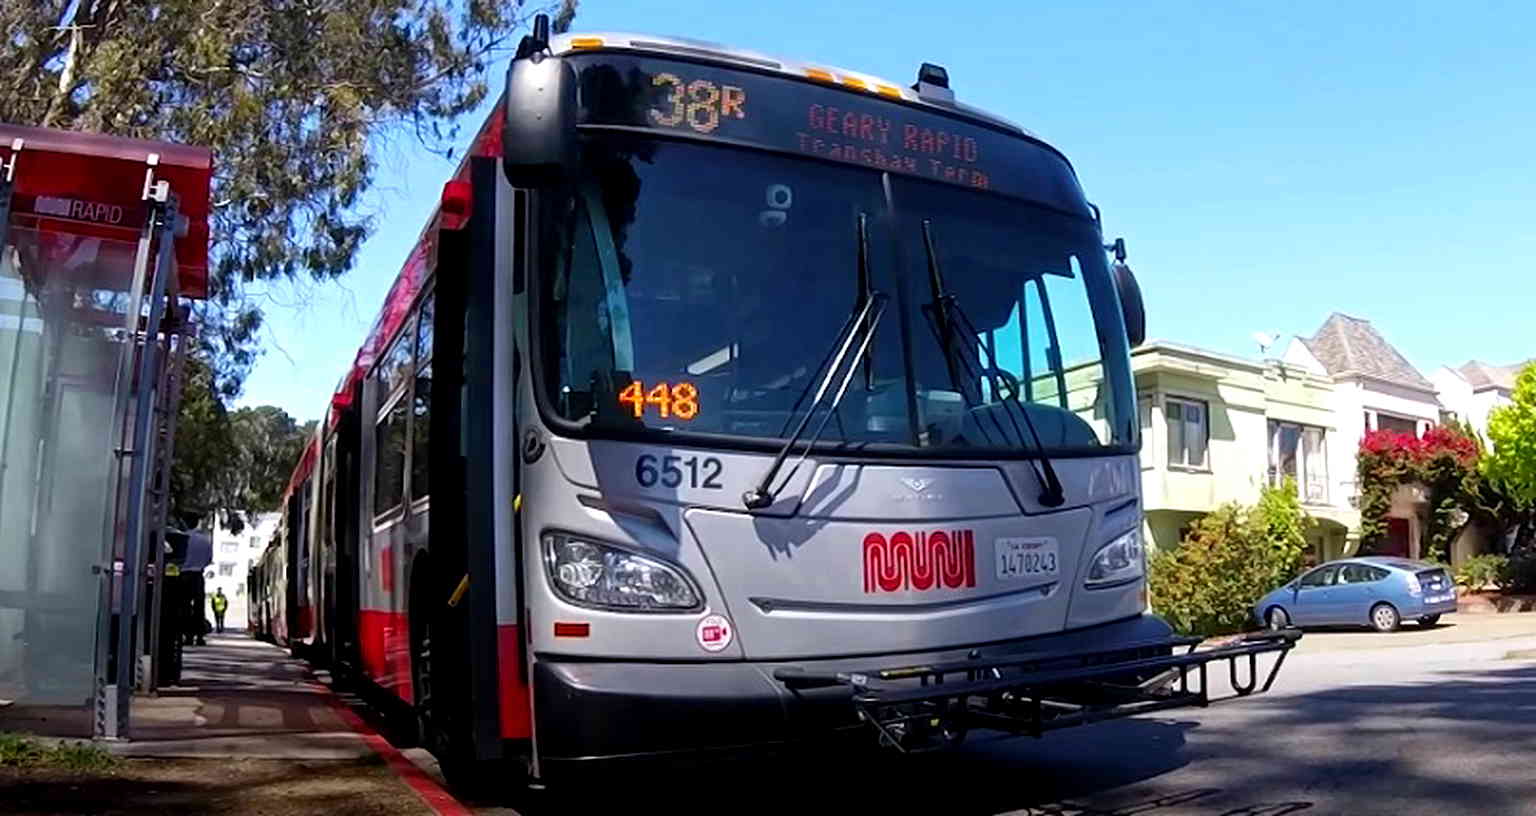 Two Asian American Passengers Attacked in Separate Incidents on SF Muni Buses